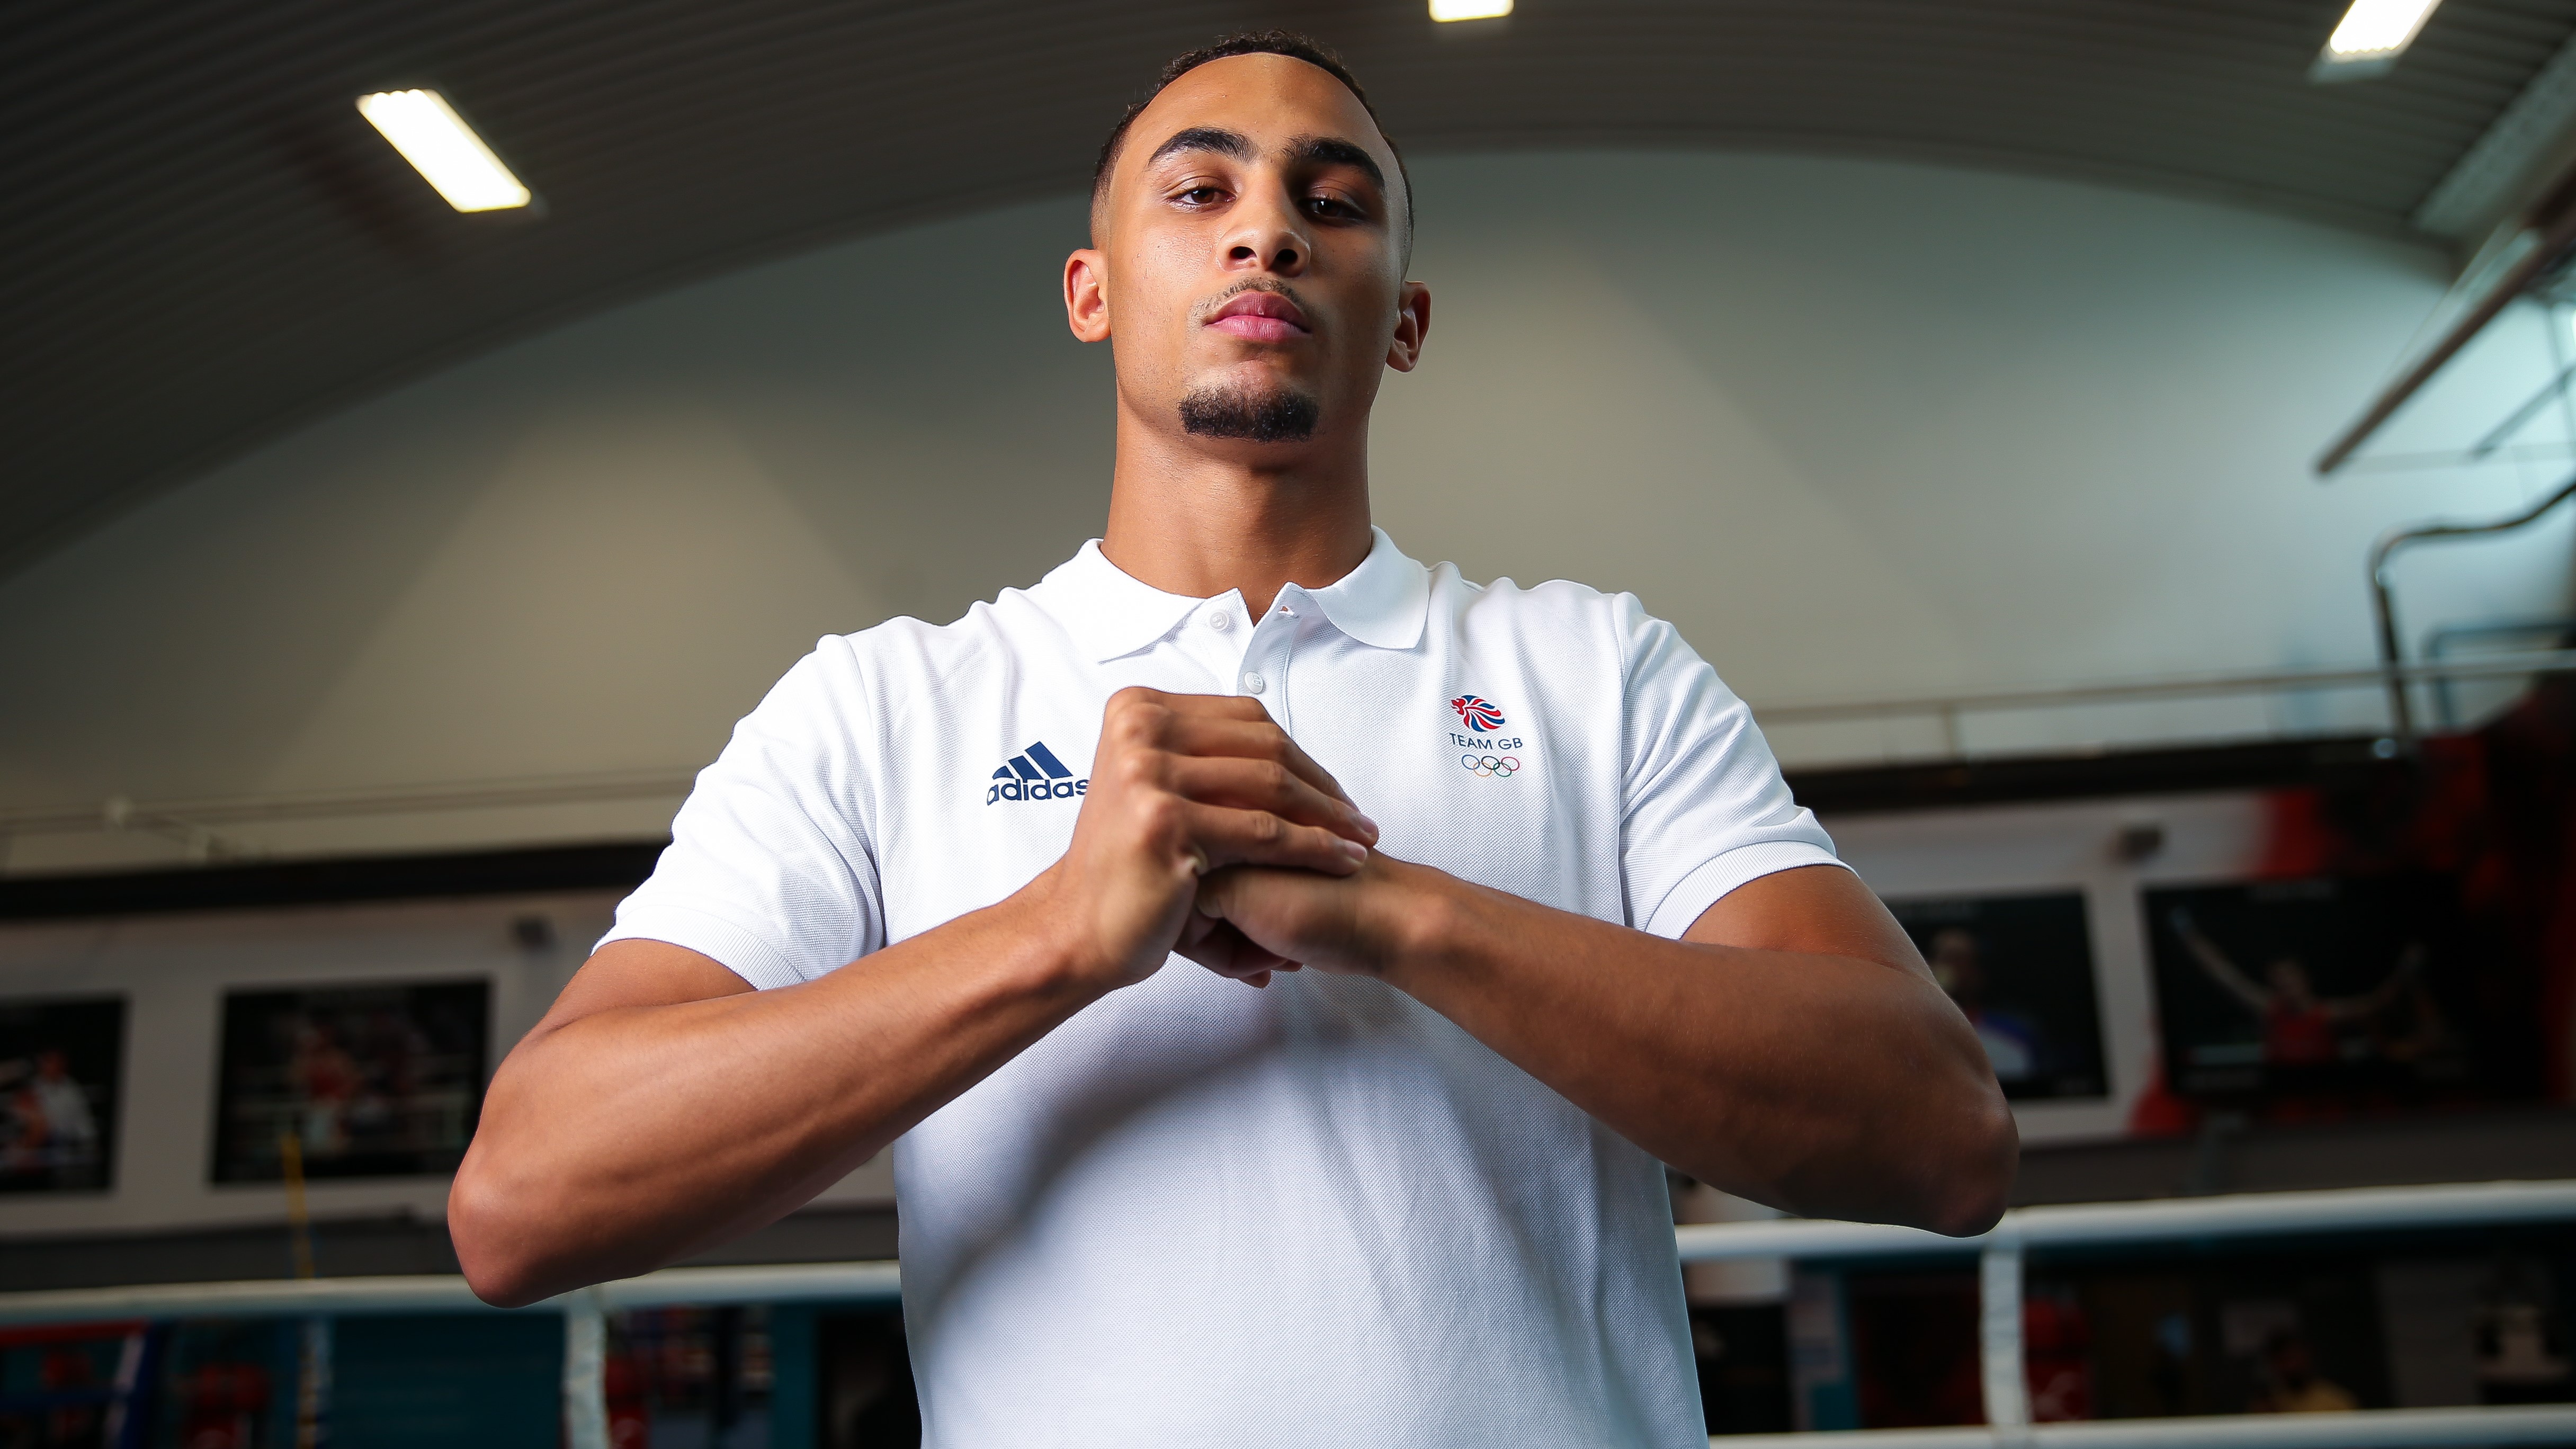 Team GB's Ben Whittaker is one of the favorites in the men's light heavyweight division